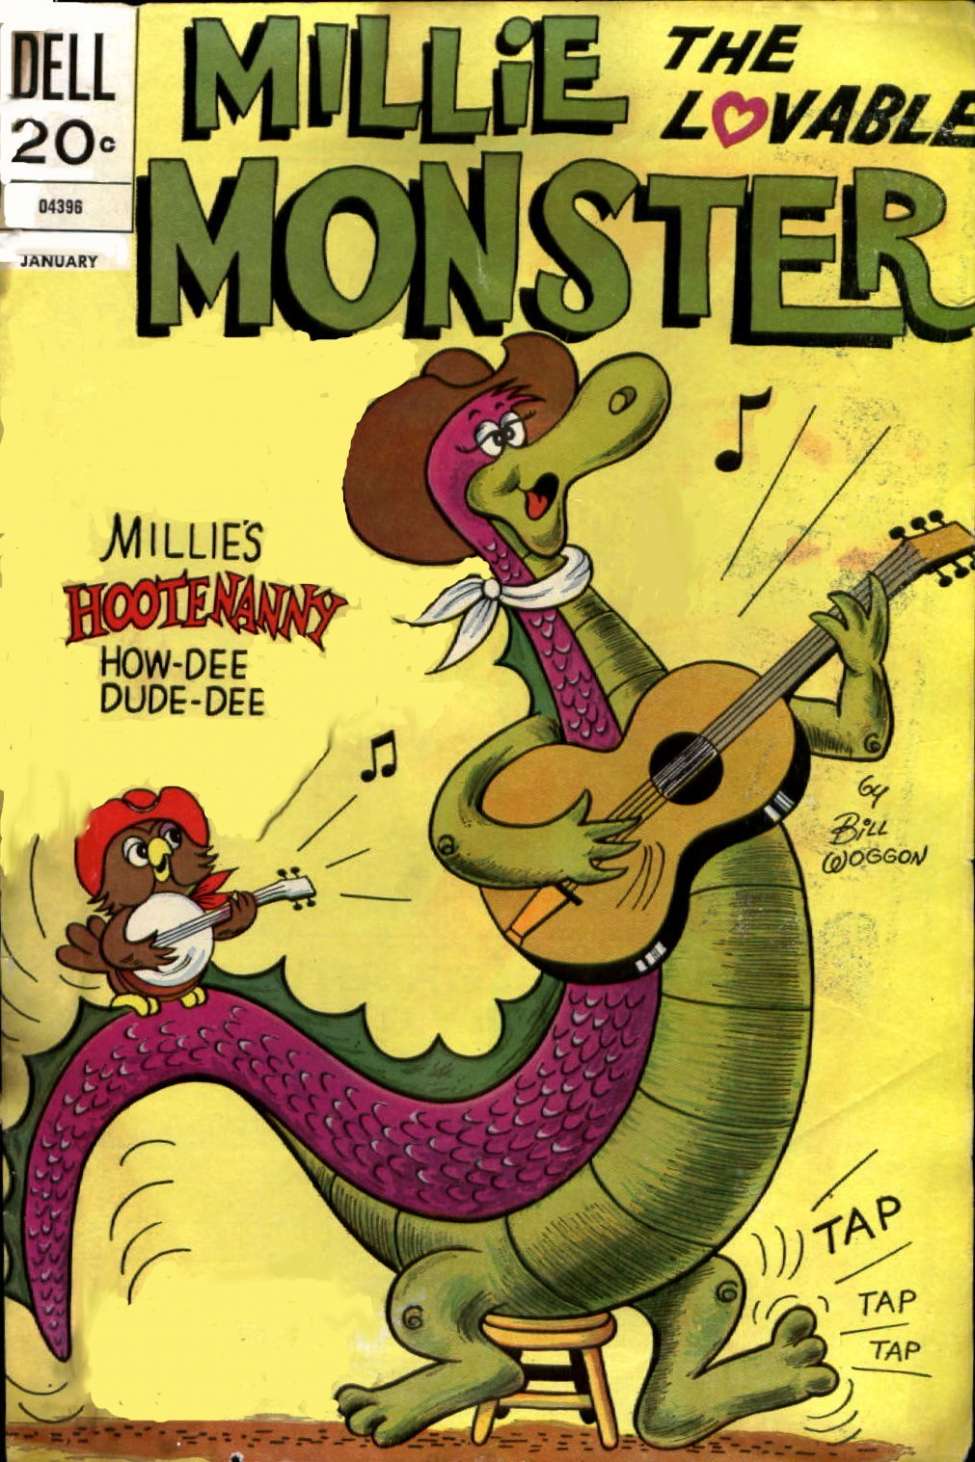 Comic Book Cover For Millie the Lovable Monster 6